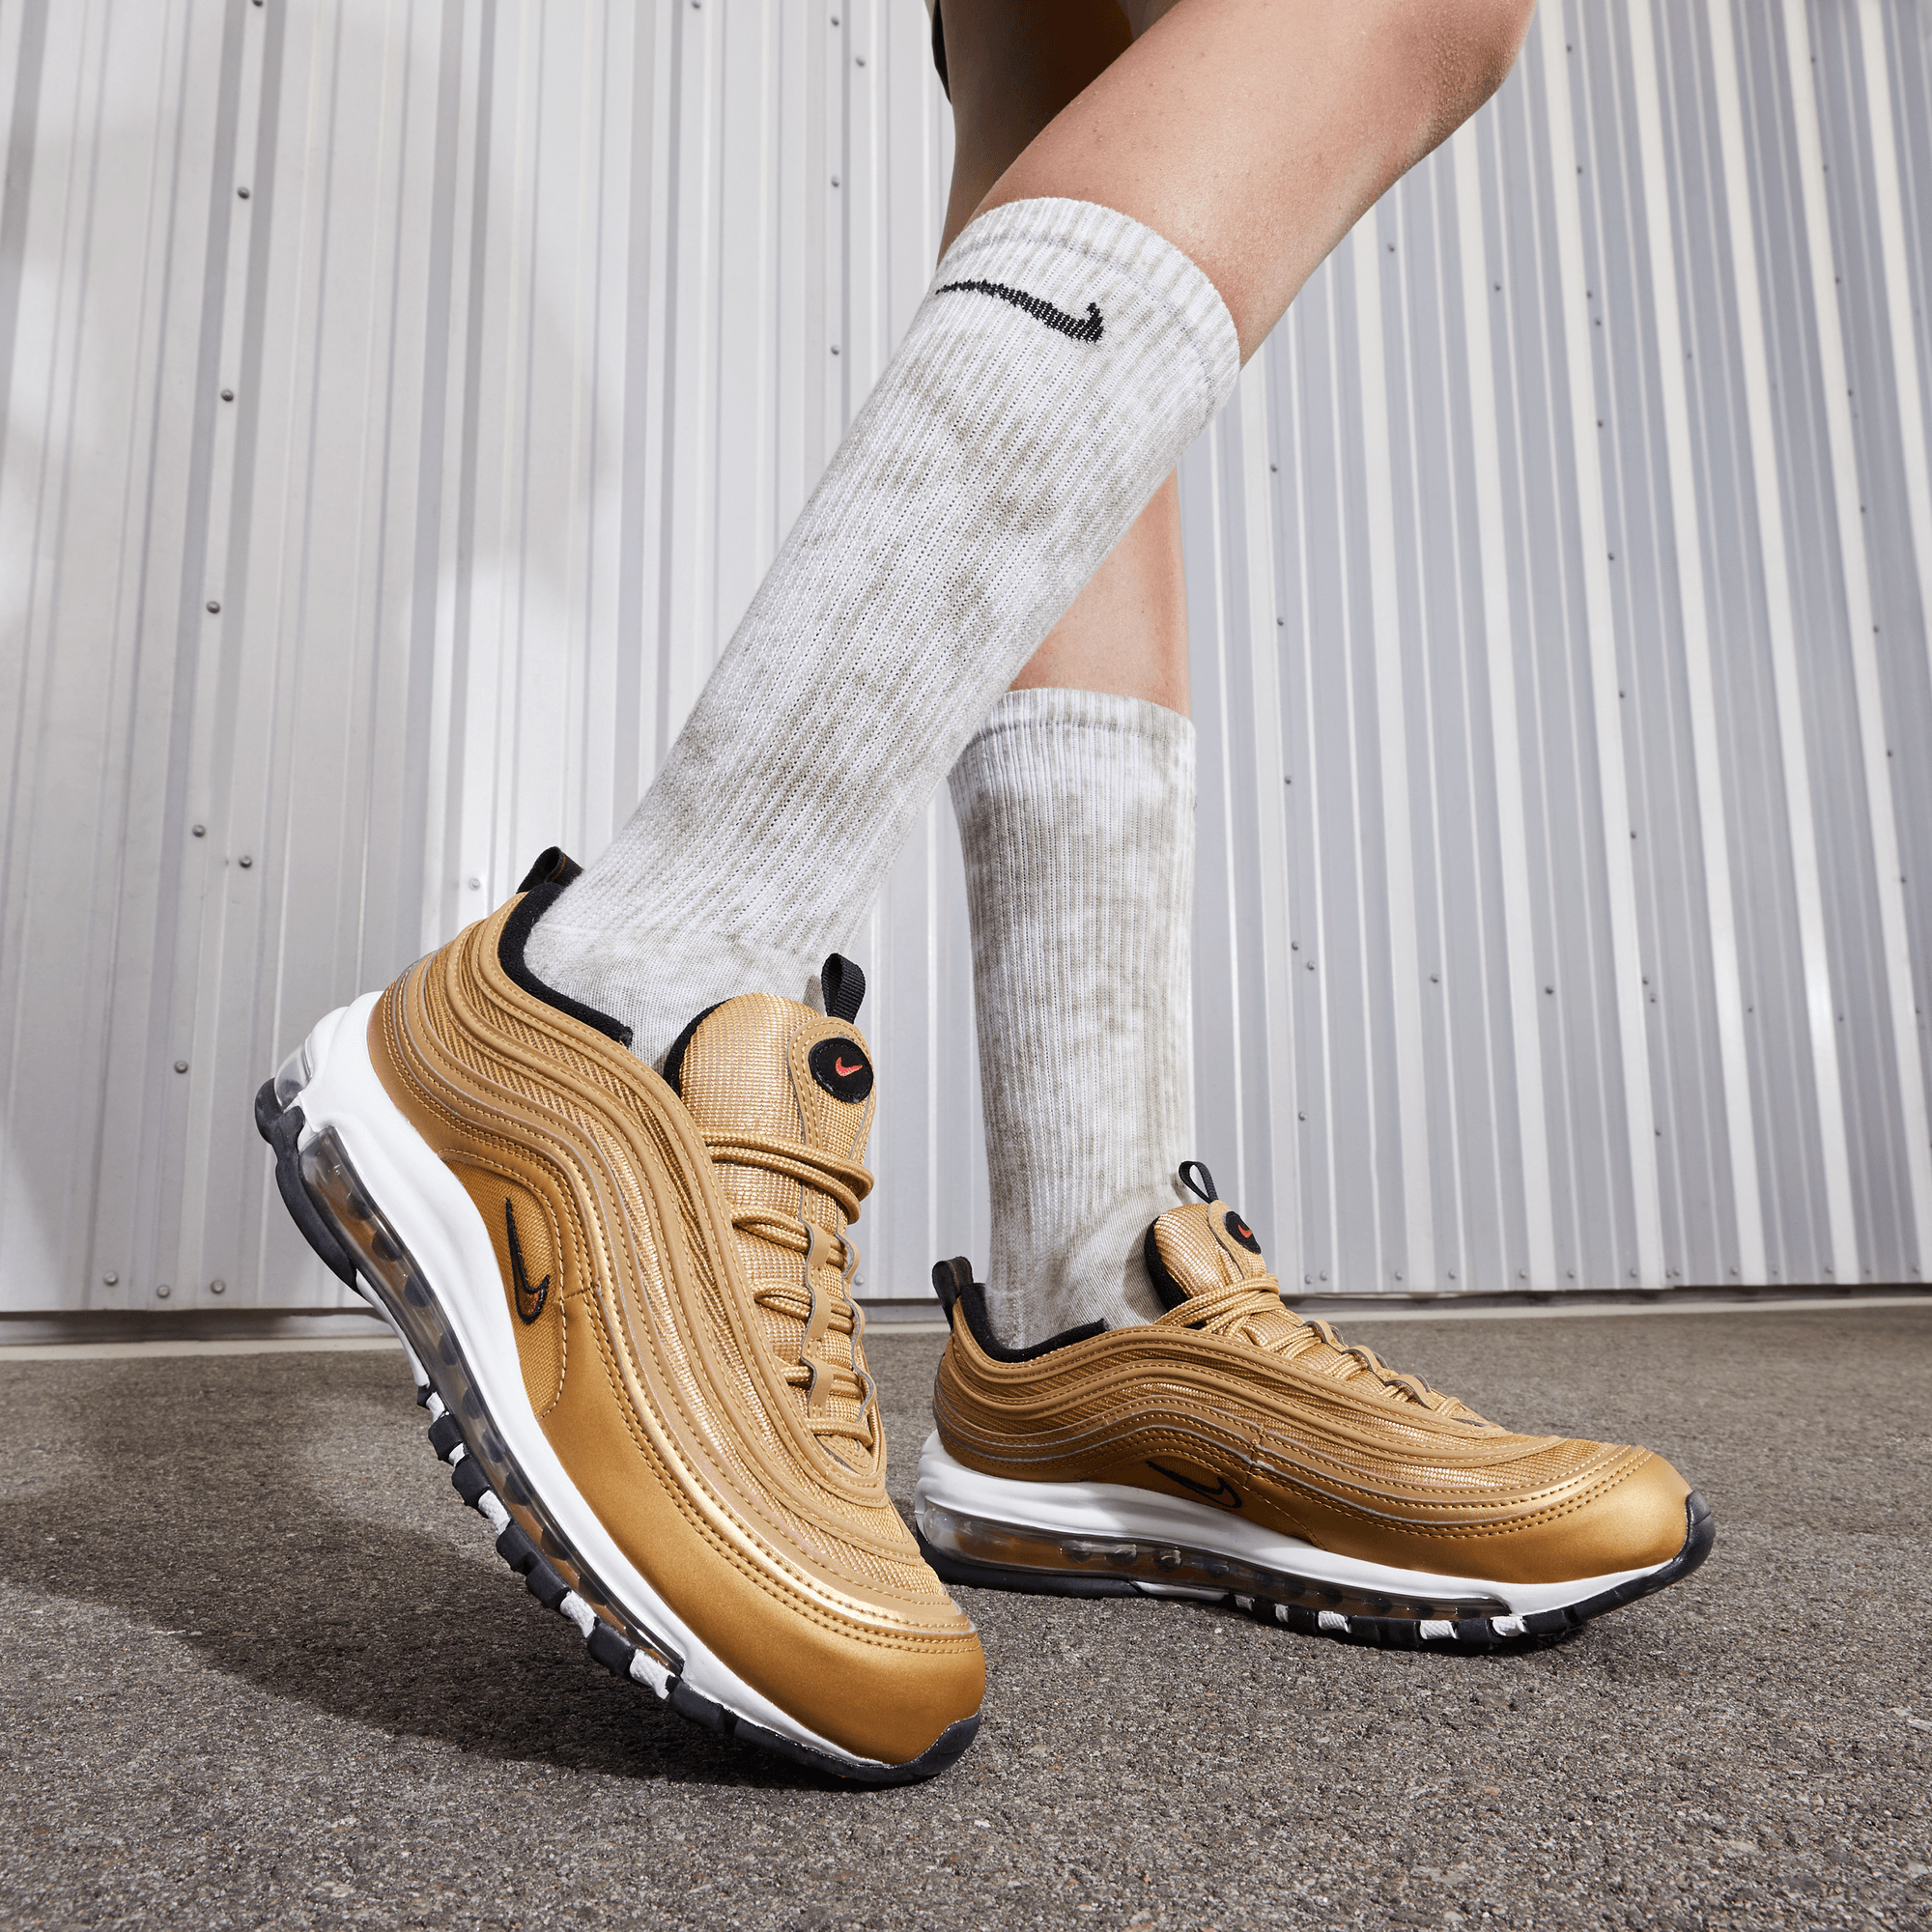 WMNS Nike Air Max 97 OG - SoleFly